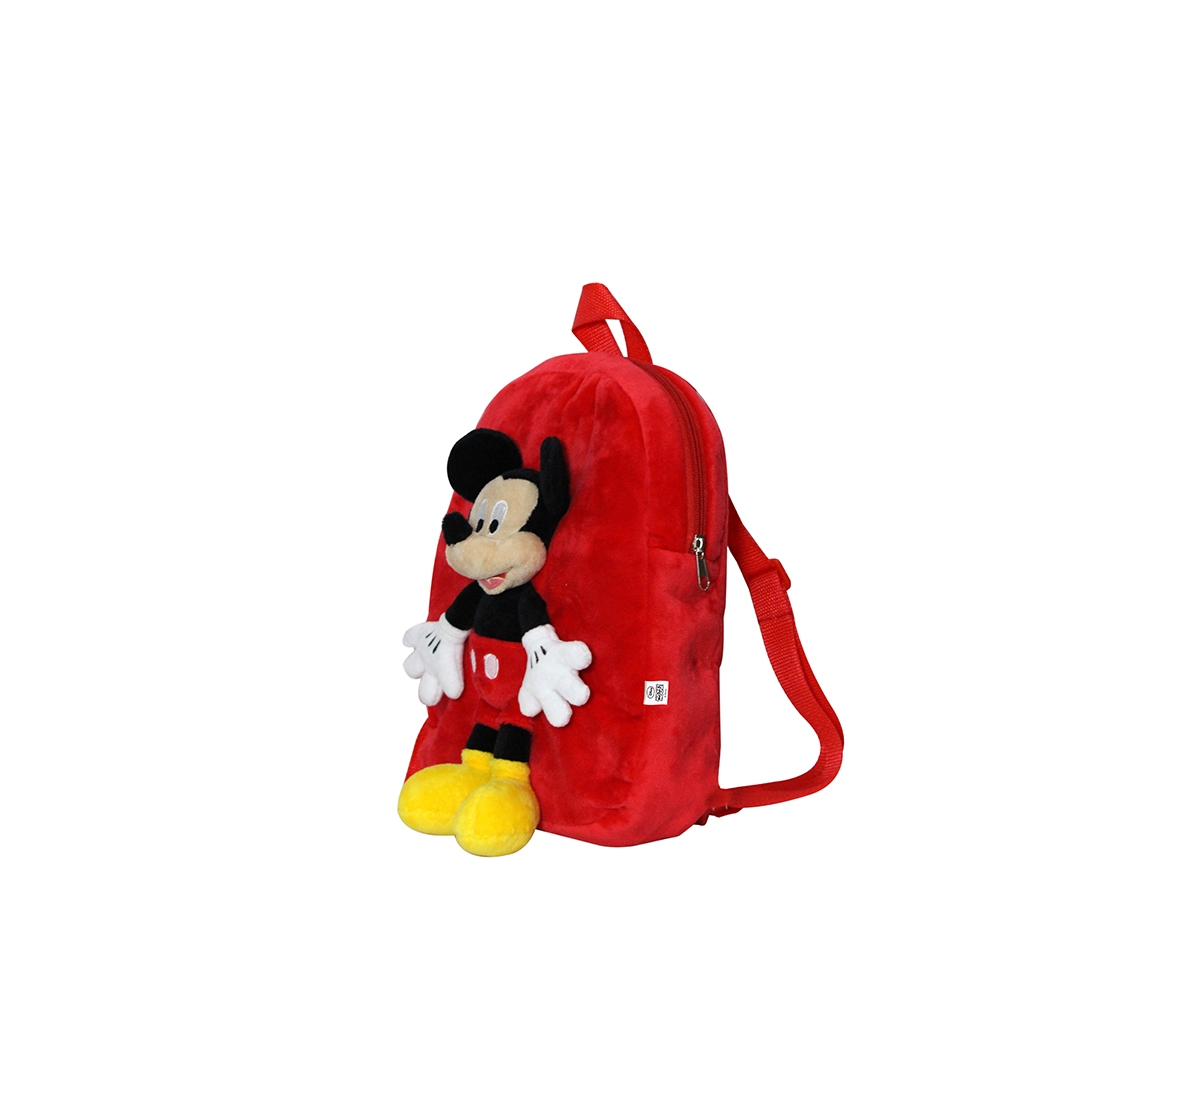 DISNEY | Disney Happiness Unisex Minnie Backpack_Pink_Free Size Plush Accessories for Kids age 12M+ - 30.48 Cm  1